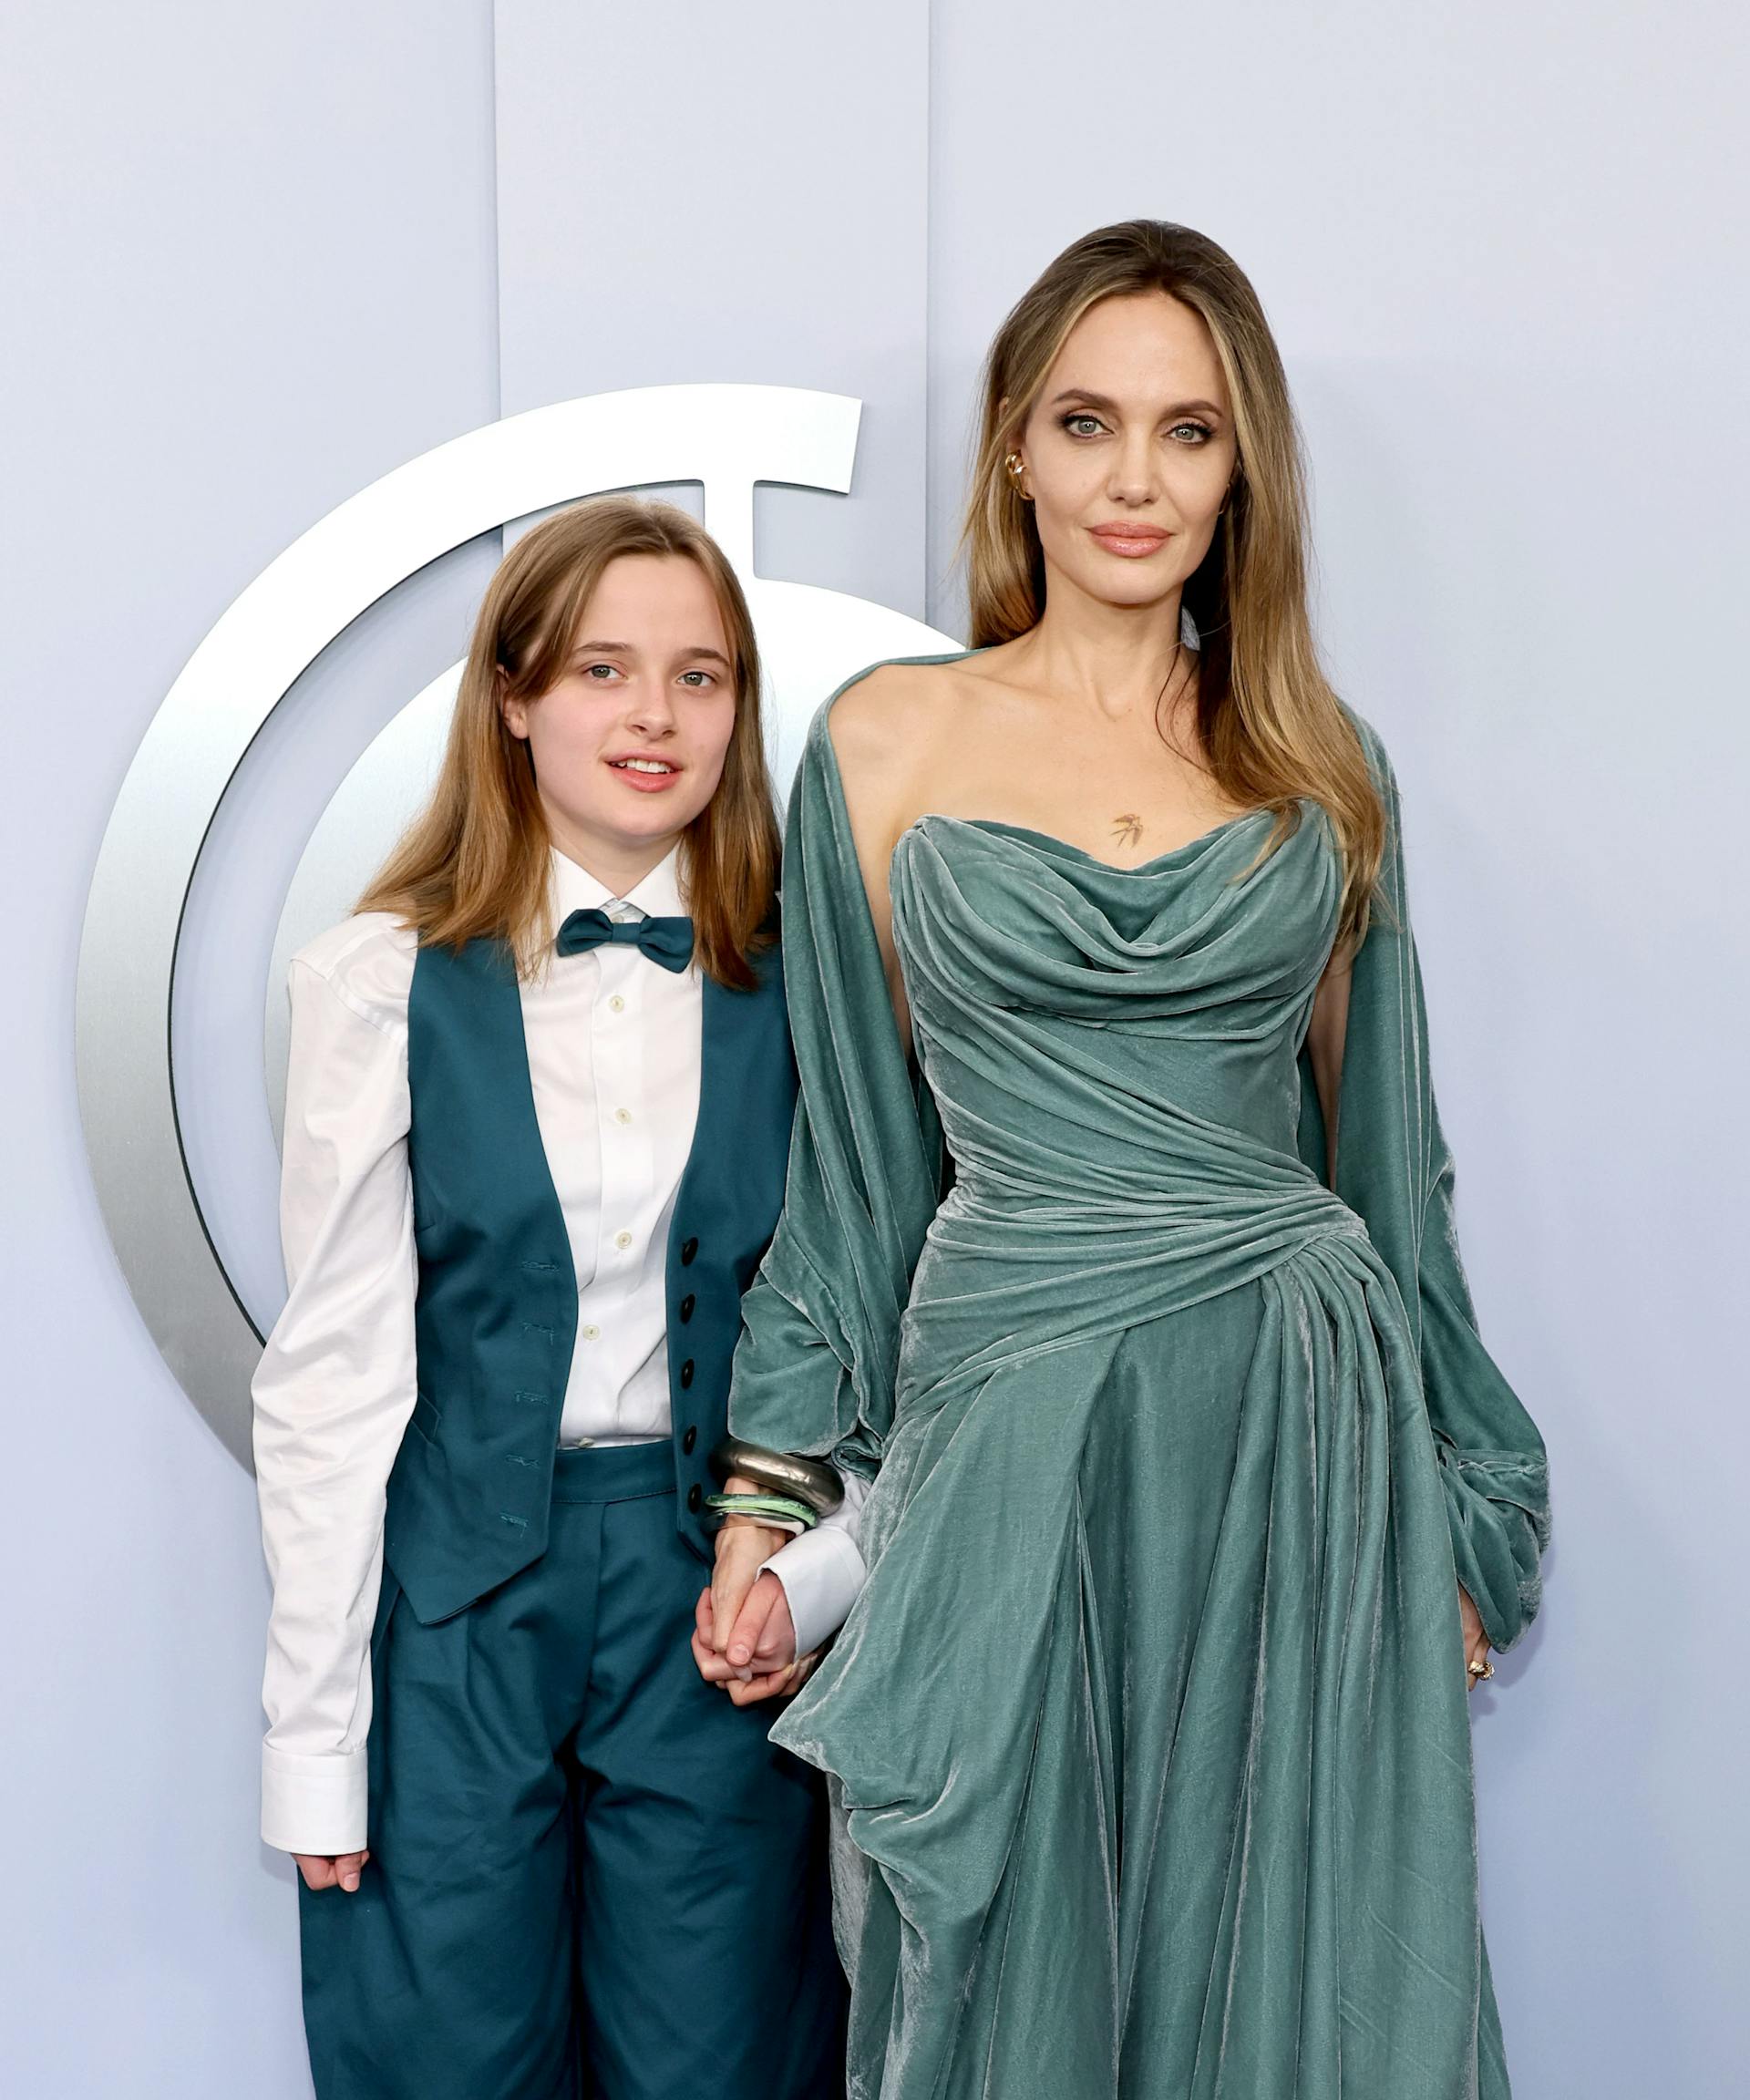 Why Can't Angelina Jolie Let Her Daughter Shine? | Evie Magazine